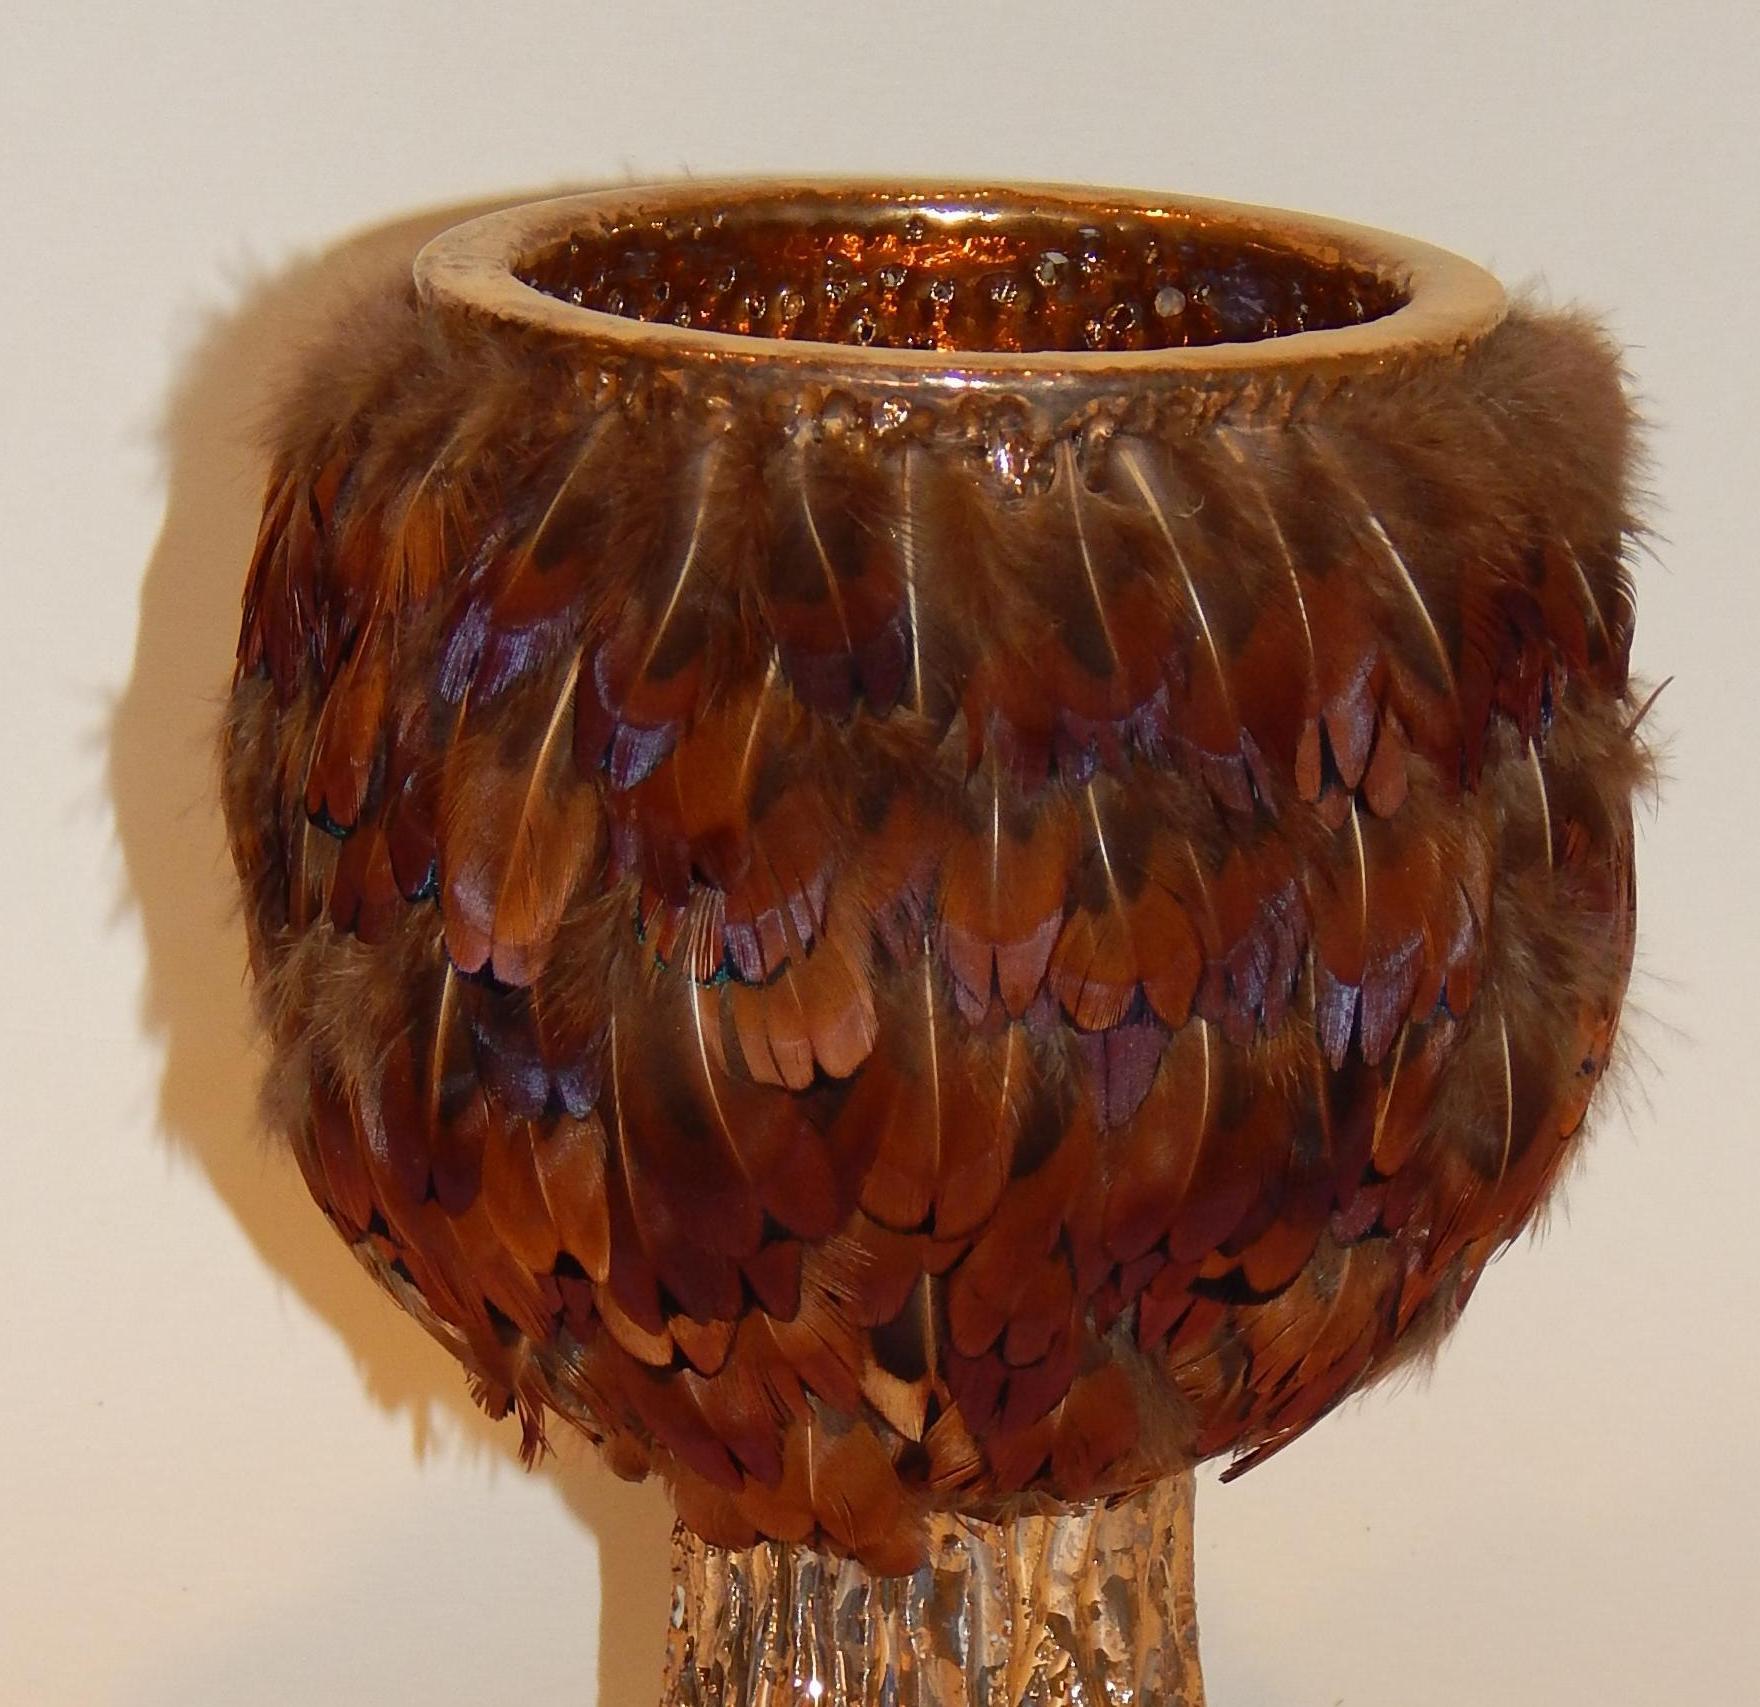 Ken Shores art pottery Chalice Form fetish pot with applied feathers.
This beautiful Ceramic vase bears a Gold Iridized Glaze with applied feathers.
Presents in a plexiglass box. Excellent condition with no damage.
Measures: 7 3/4